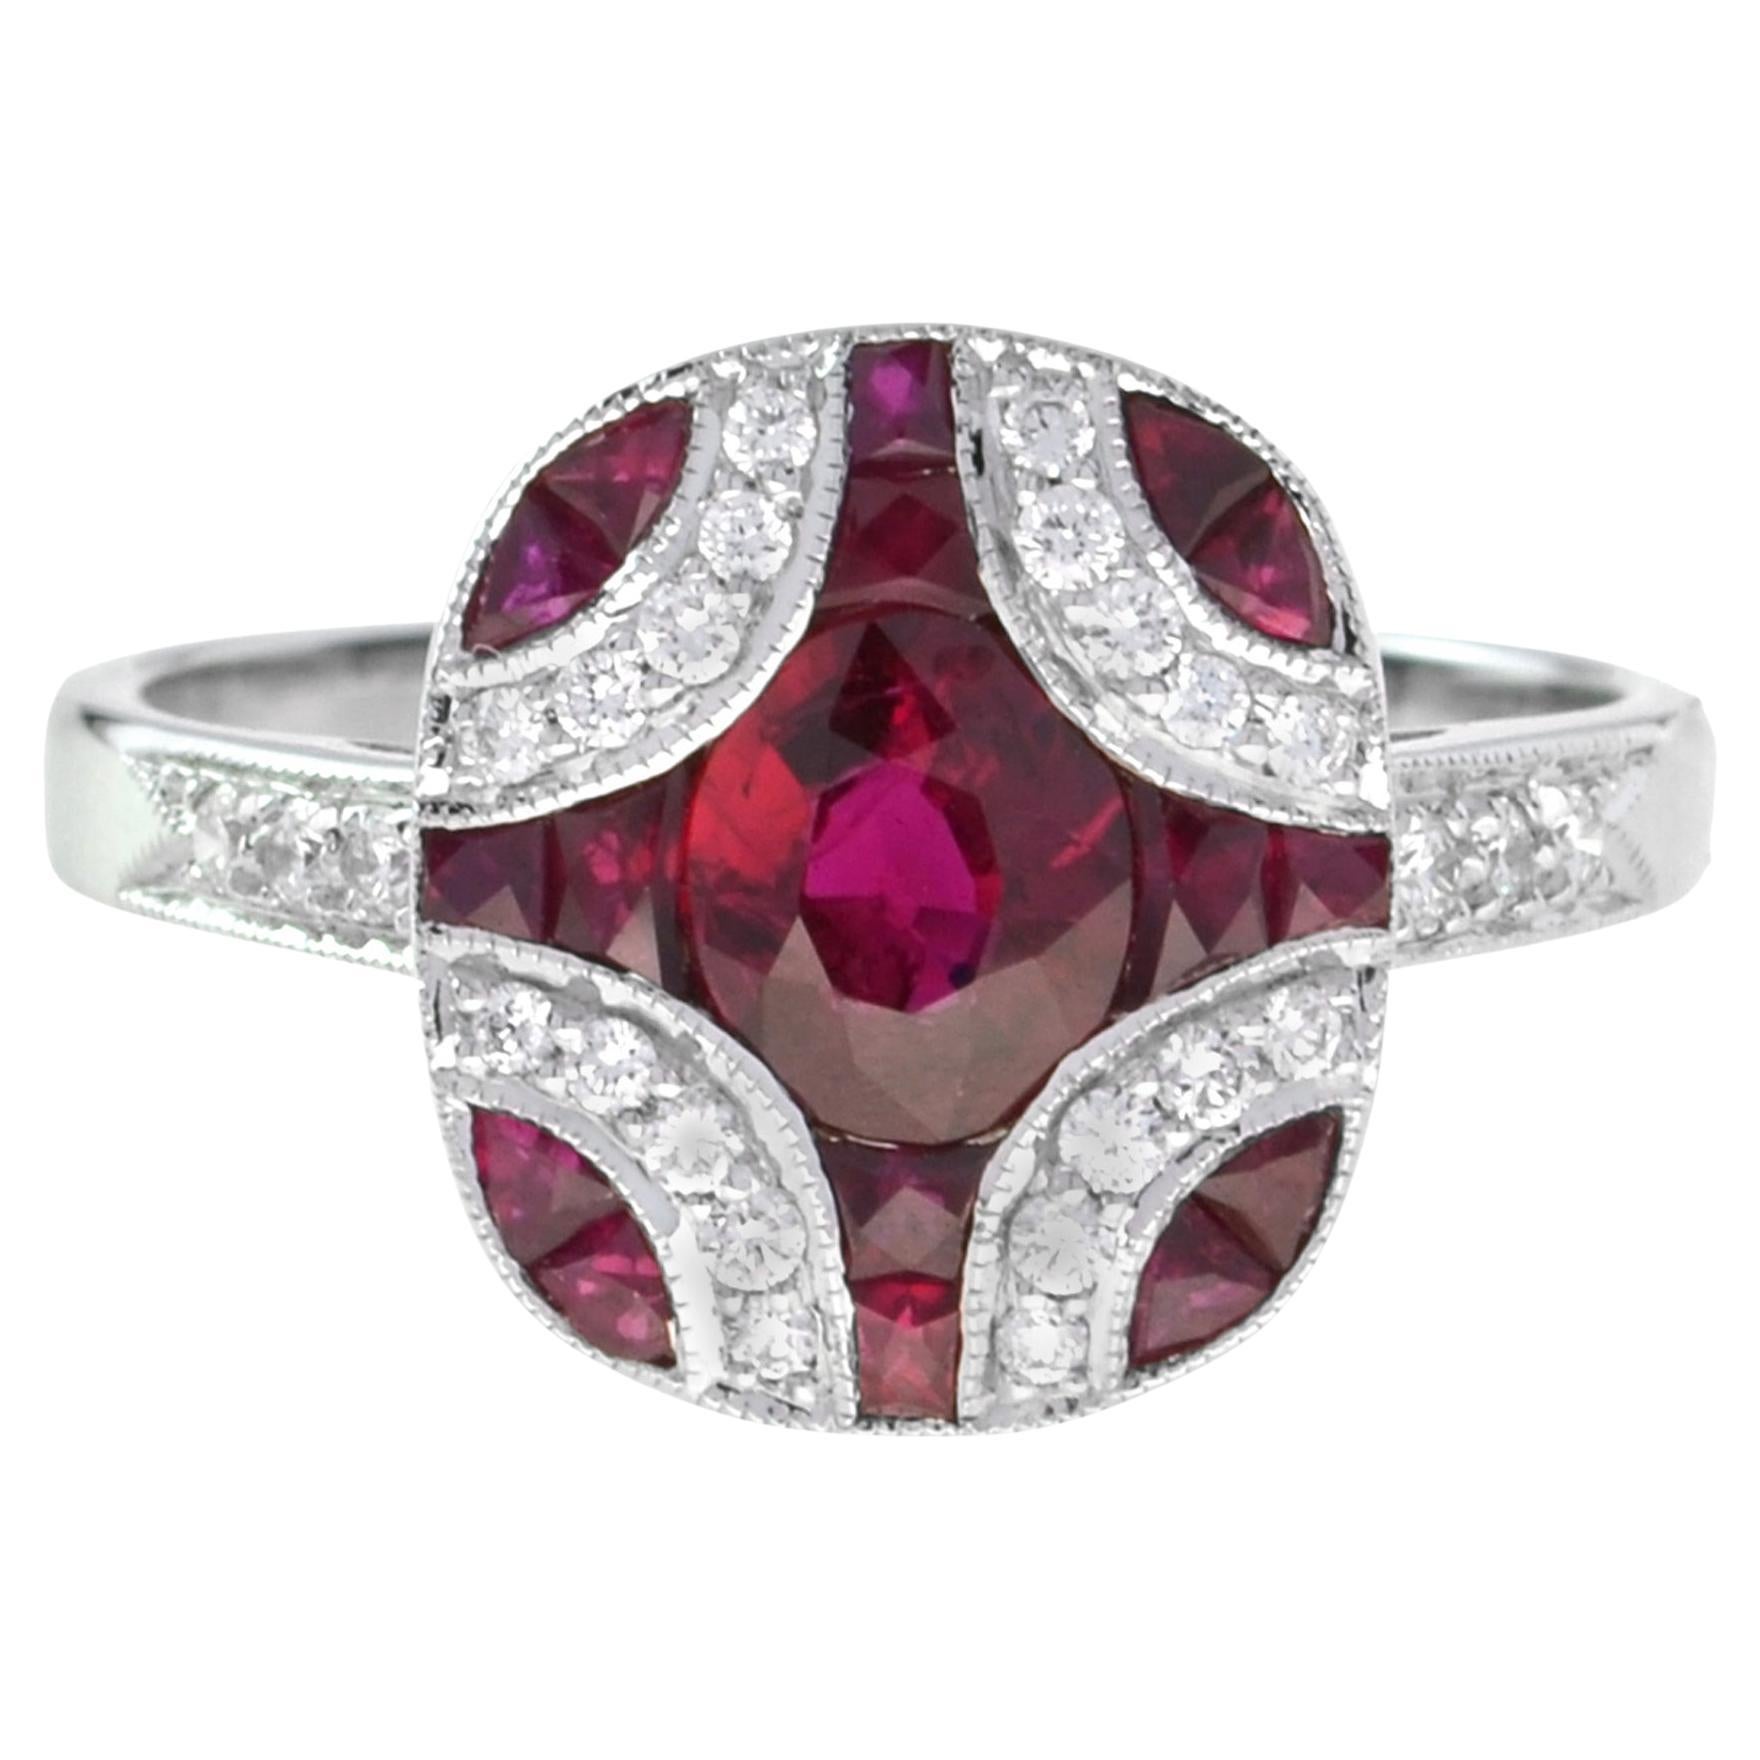 For Sale:  Art Deco Style Oval Ruby with Diamond Cluster Ring in 18K White Gold